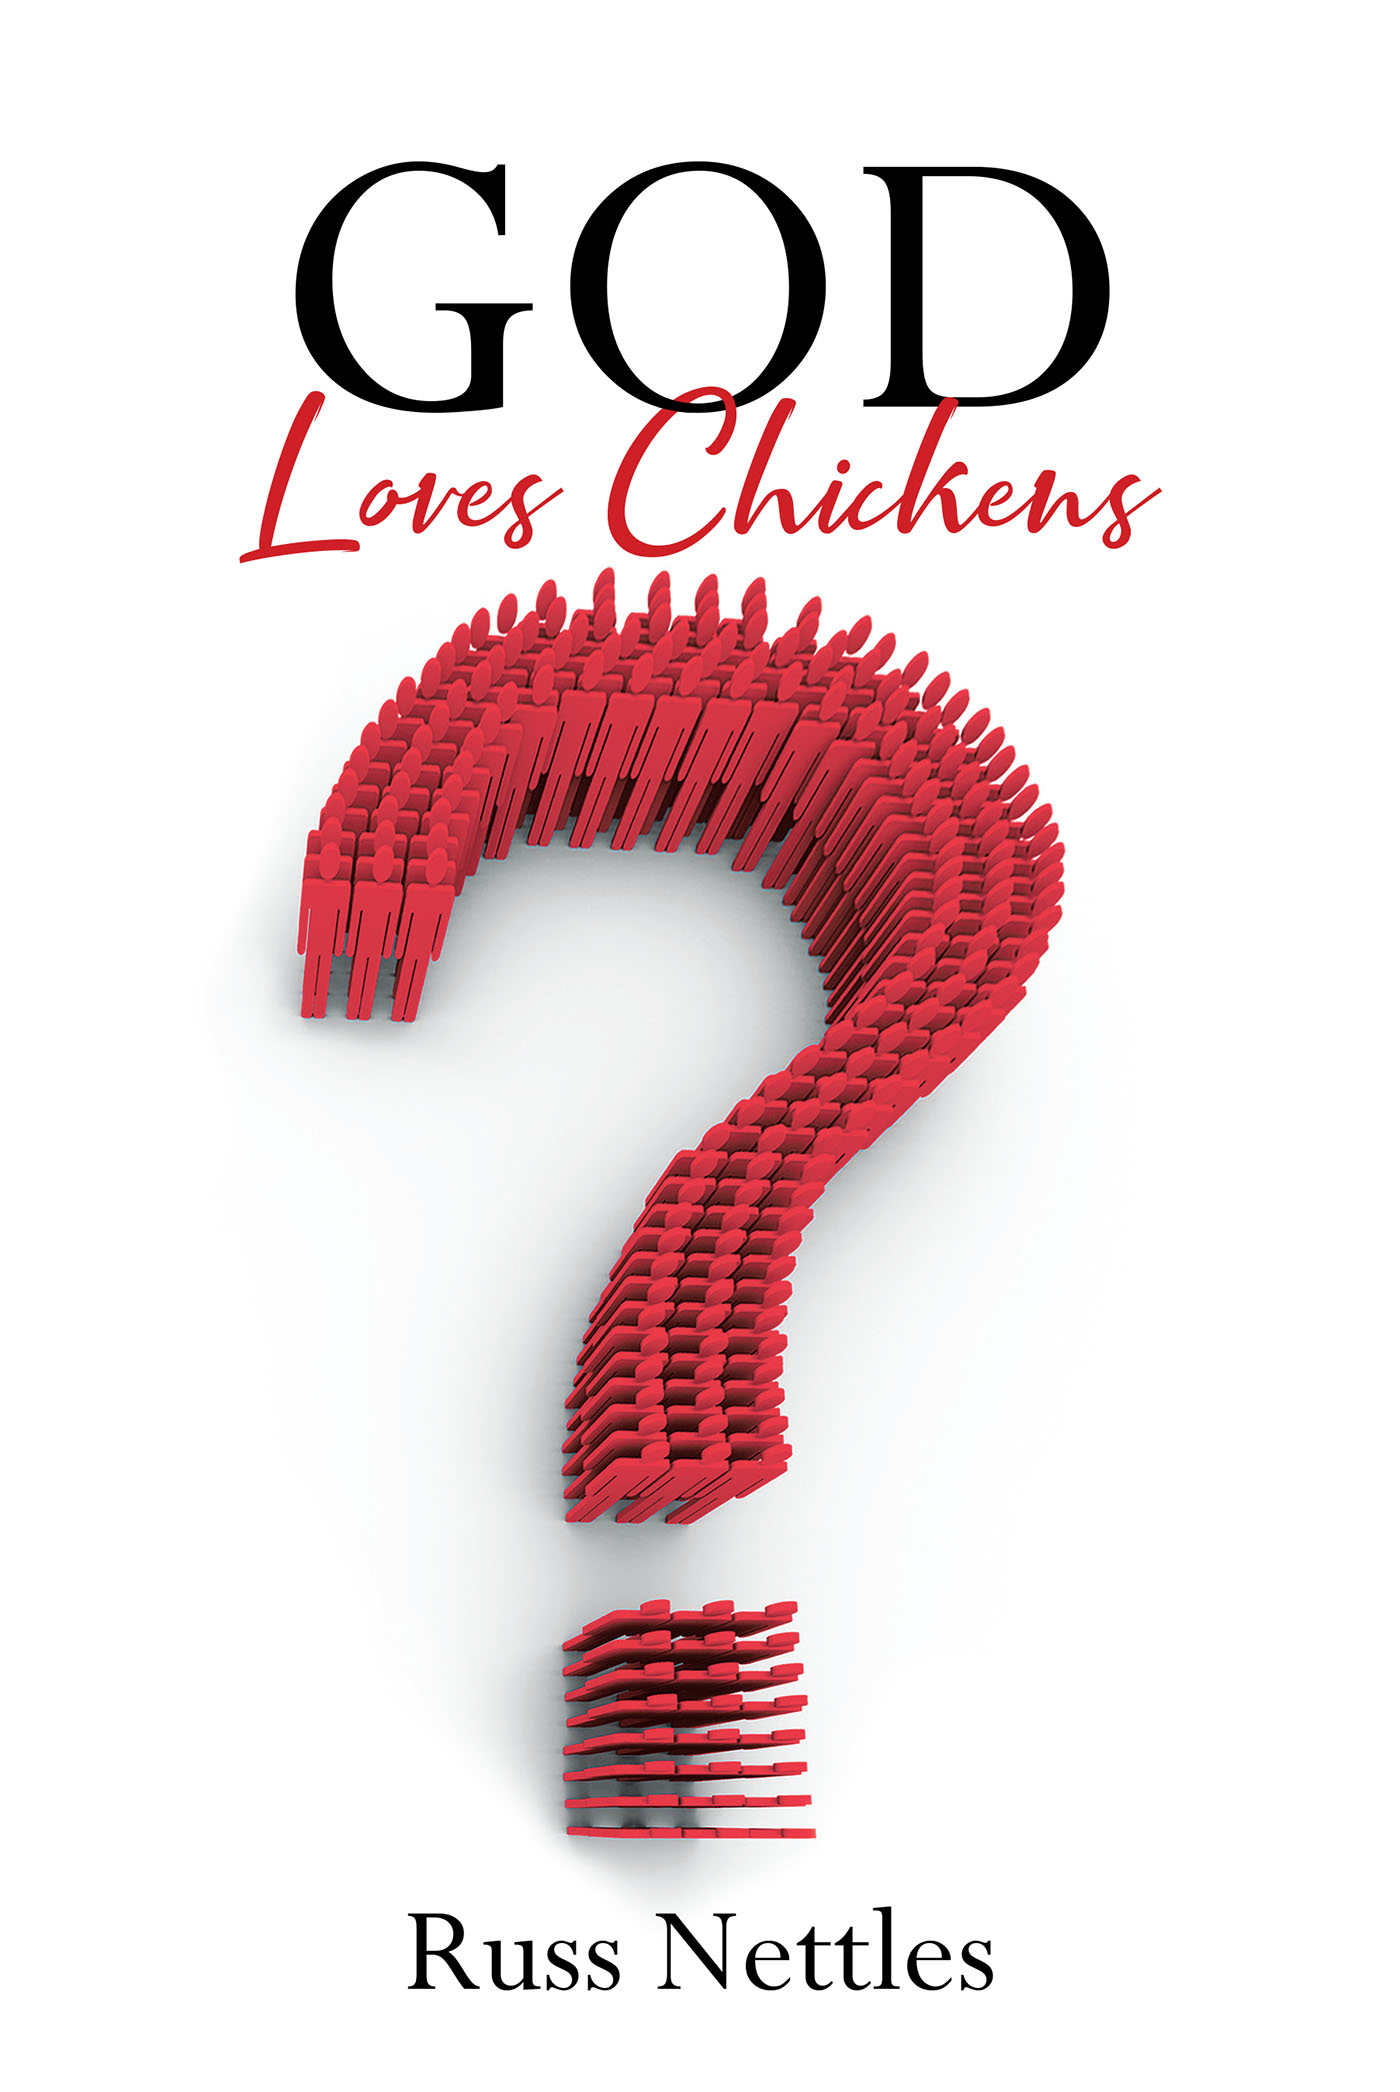 Author Russ Nettles’s New Book, "God Loves Chickens," Encourages Readers to Question What to Believe Through Their Faith and What is Next in Their Lives